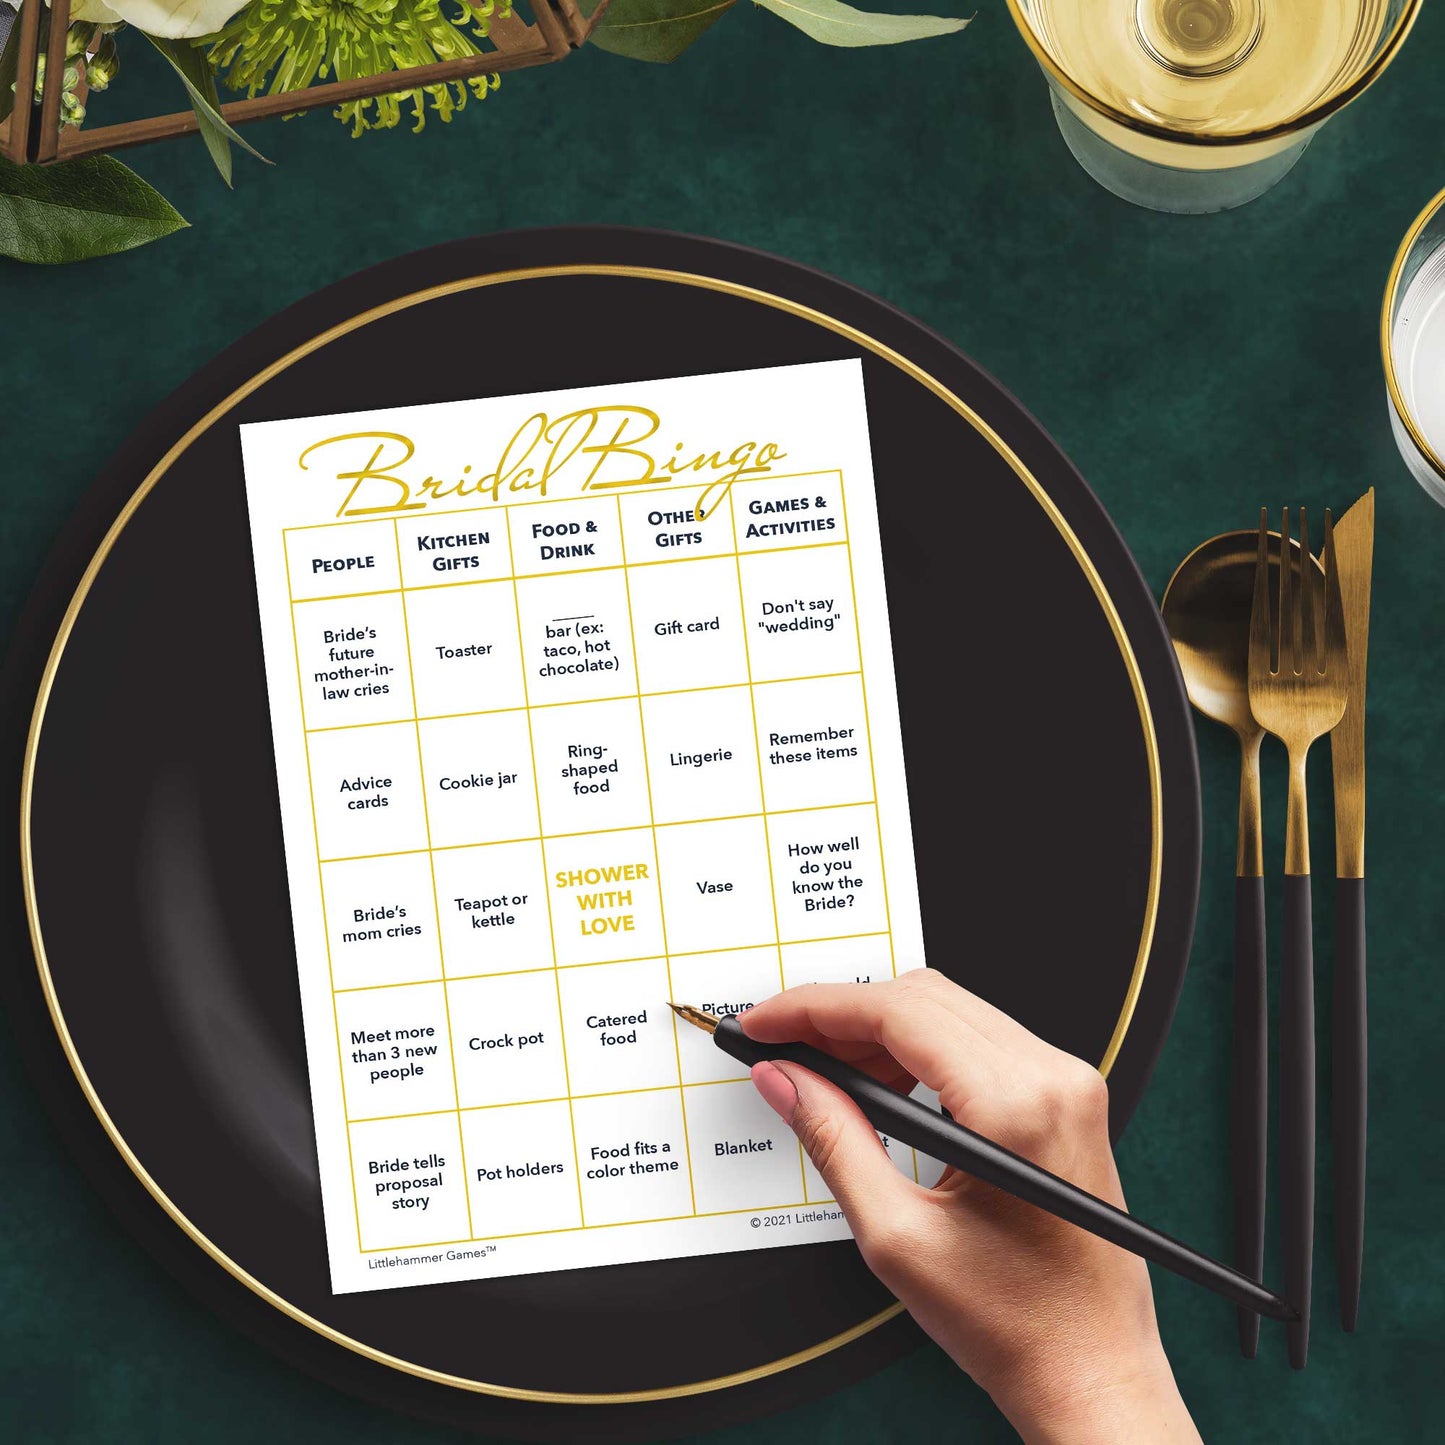 Woman with a pen sitting at a table with a gold and white Bridal Bingo game card on a black and gold plate at a dark place setting